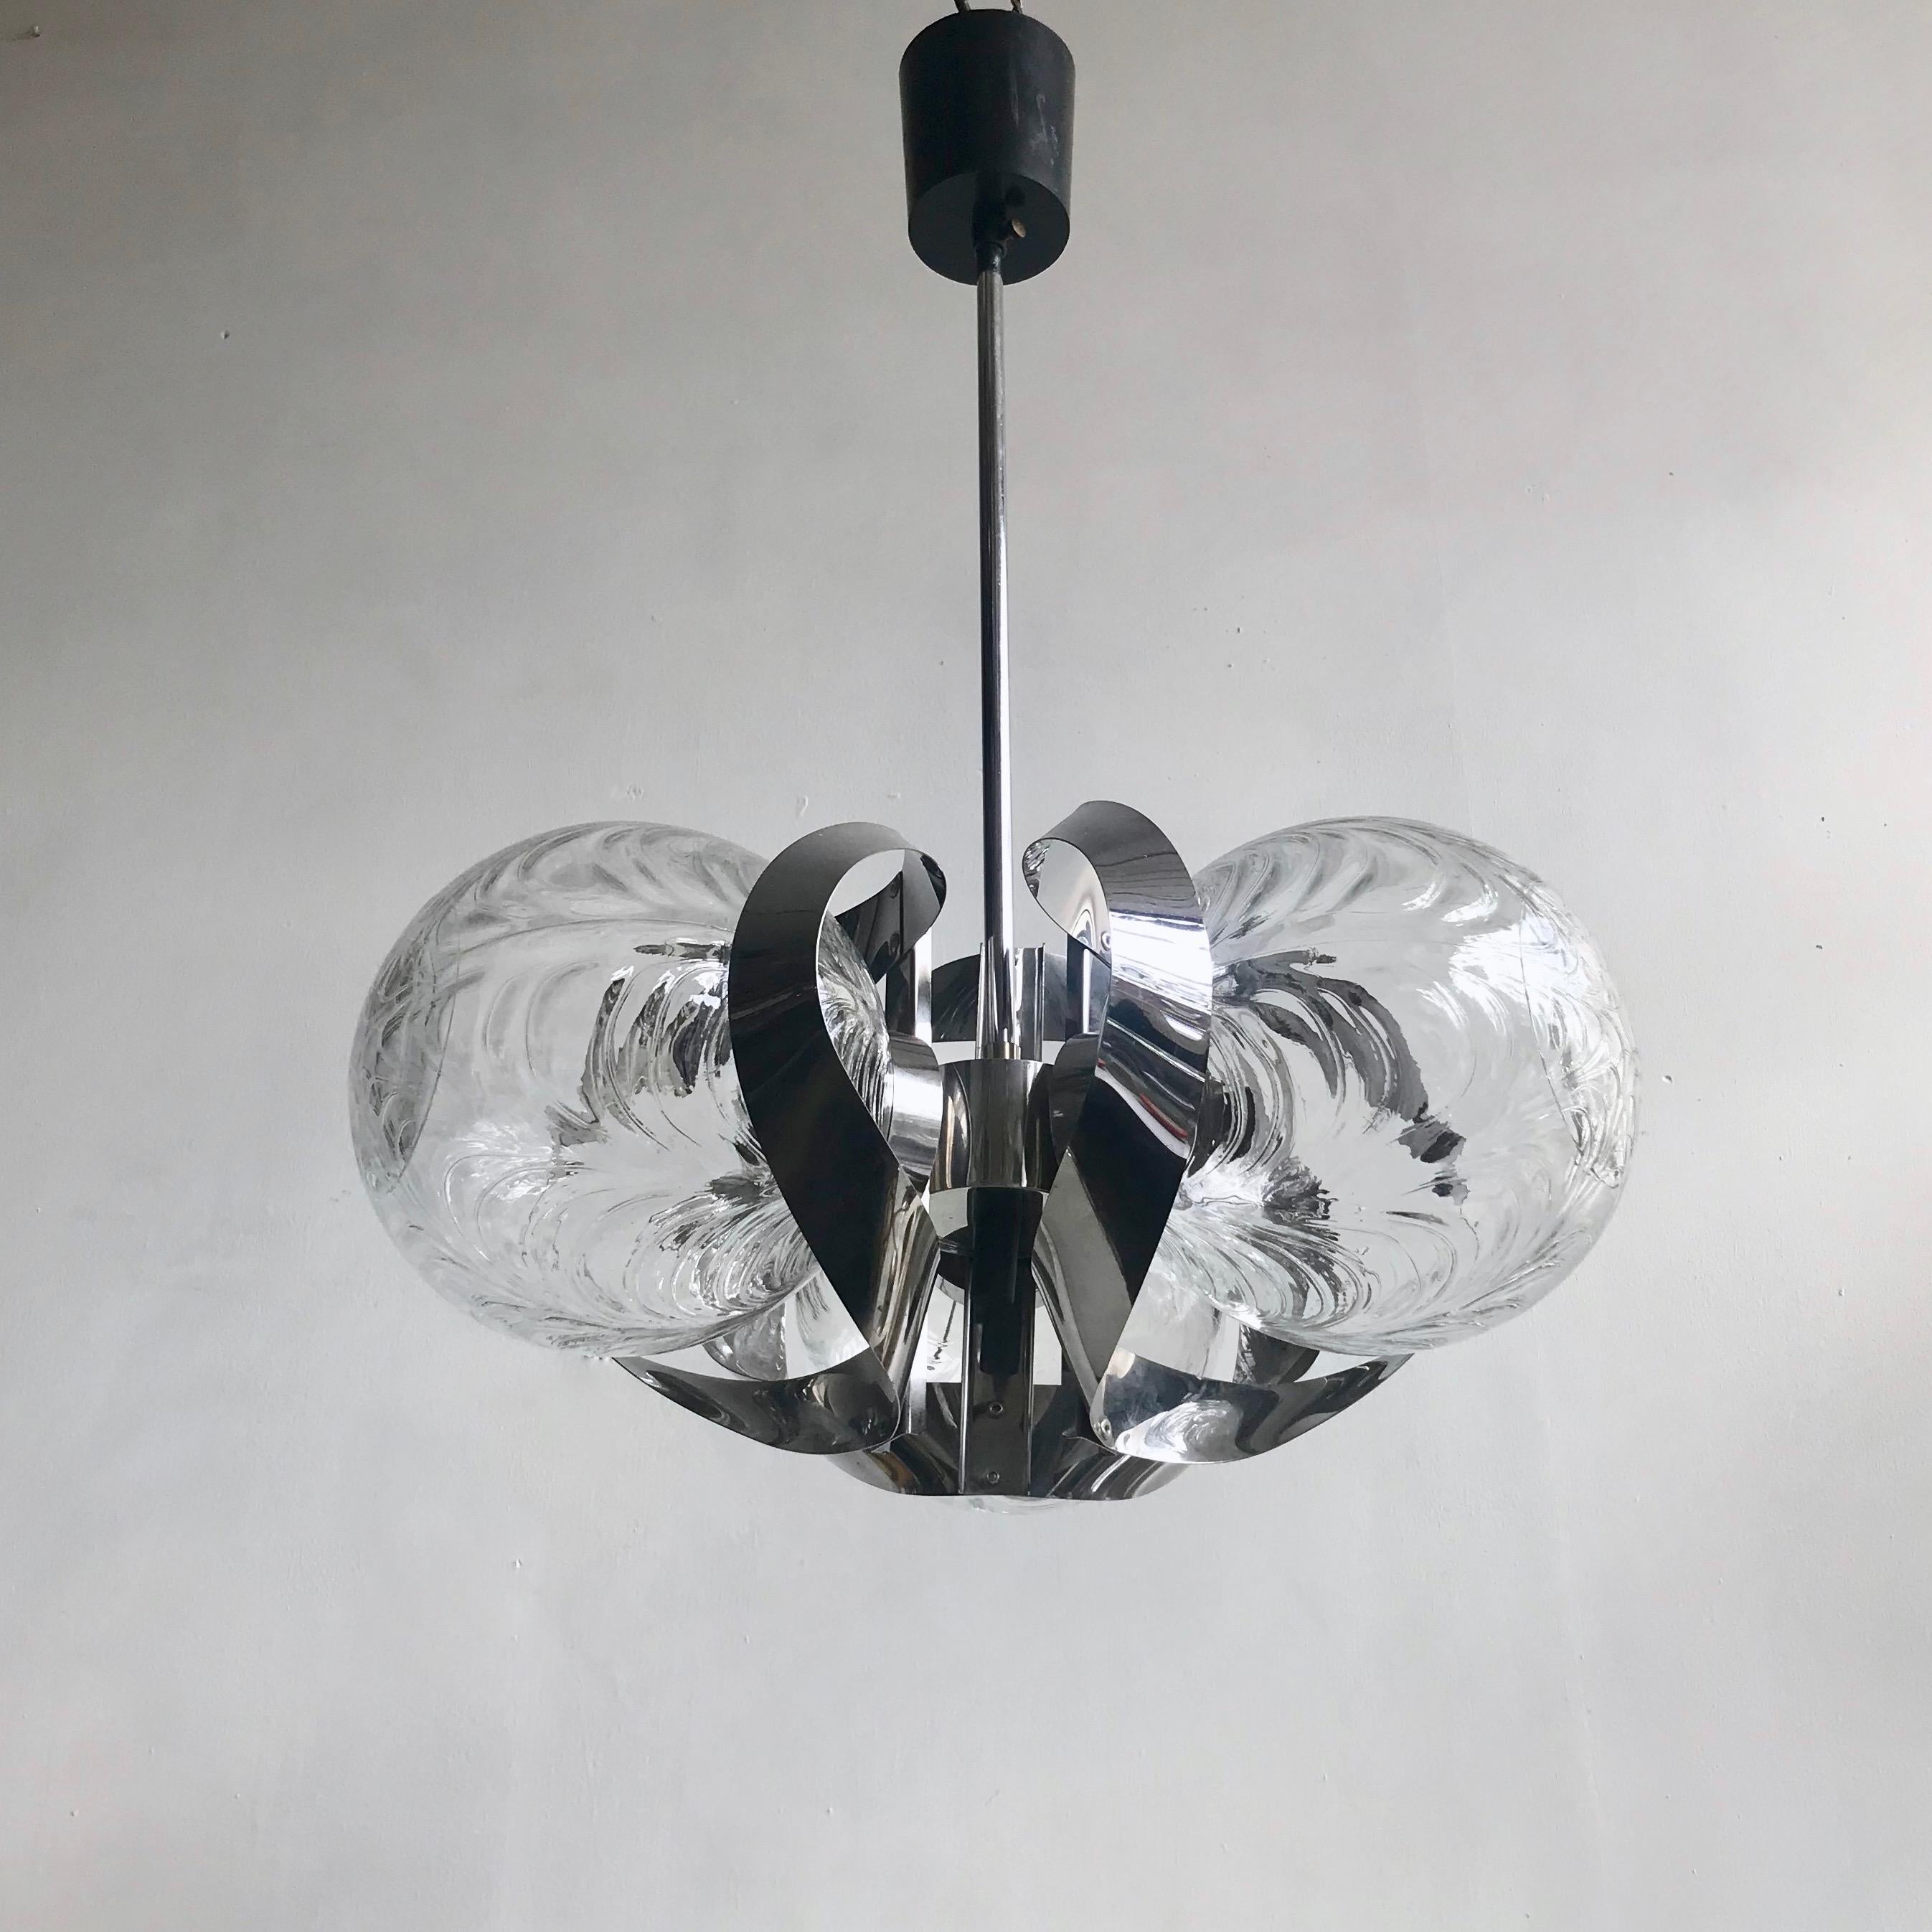 Midcentury Czech pendant with chrome base and 3 clear textured globe glass shades. The pendant is suspended on a central rod leading to 3 lamp brackets. The shade of these brackets mirrors the swirls in the glass shades.
 